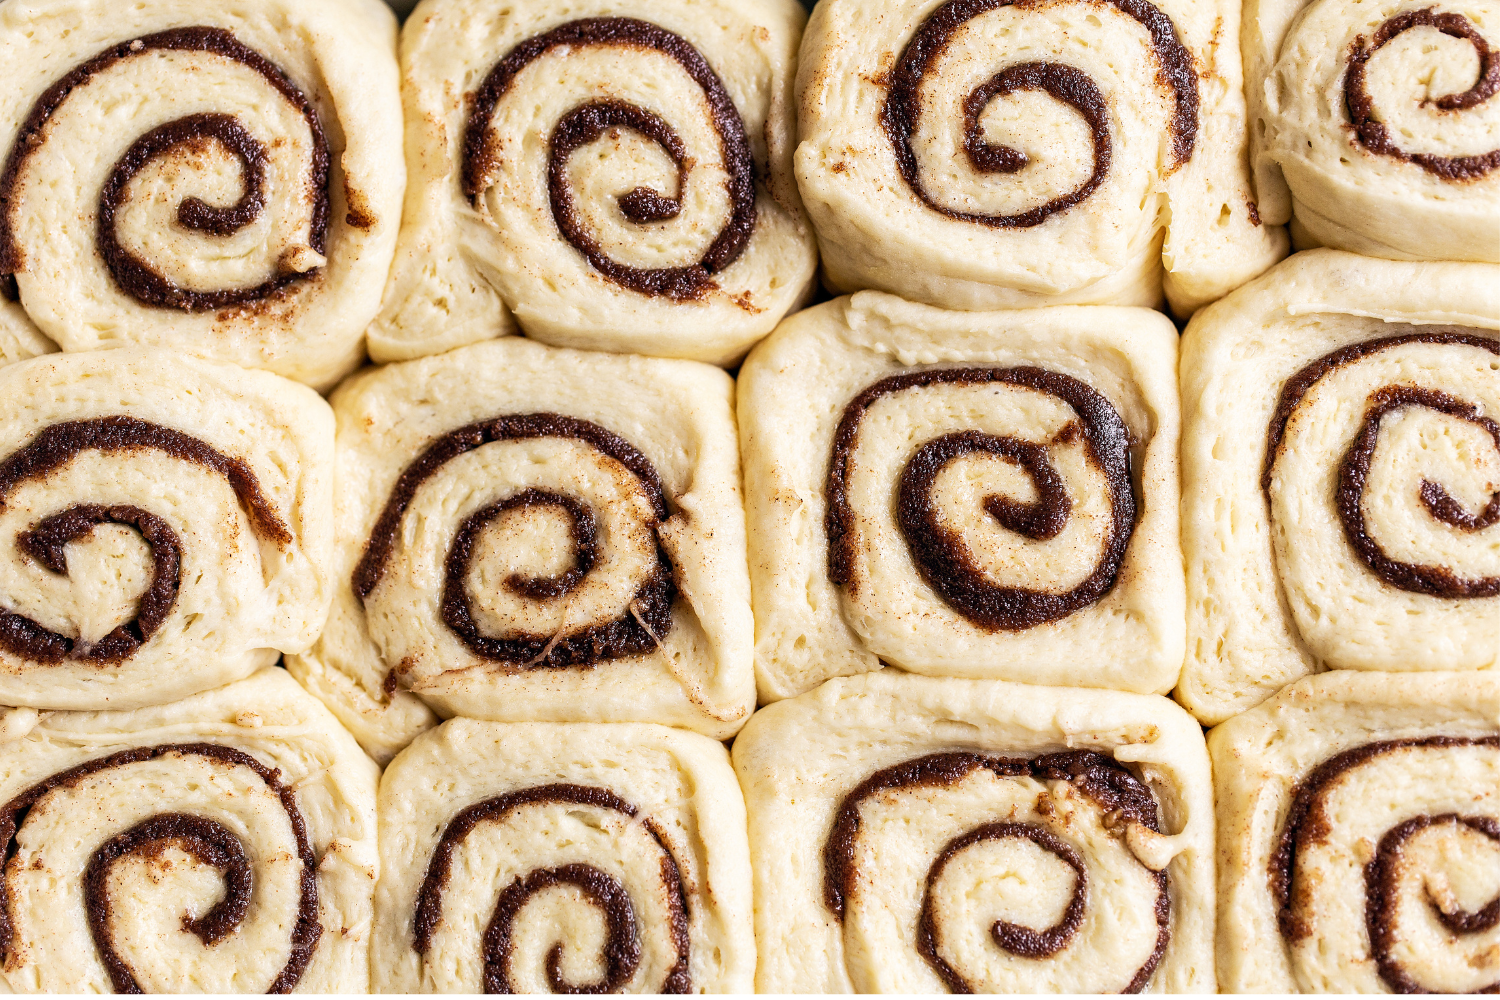 unbaked homemade cinnamon rolls, ready to be baked